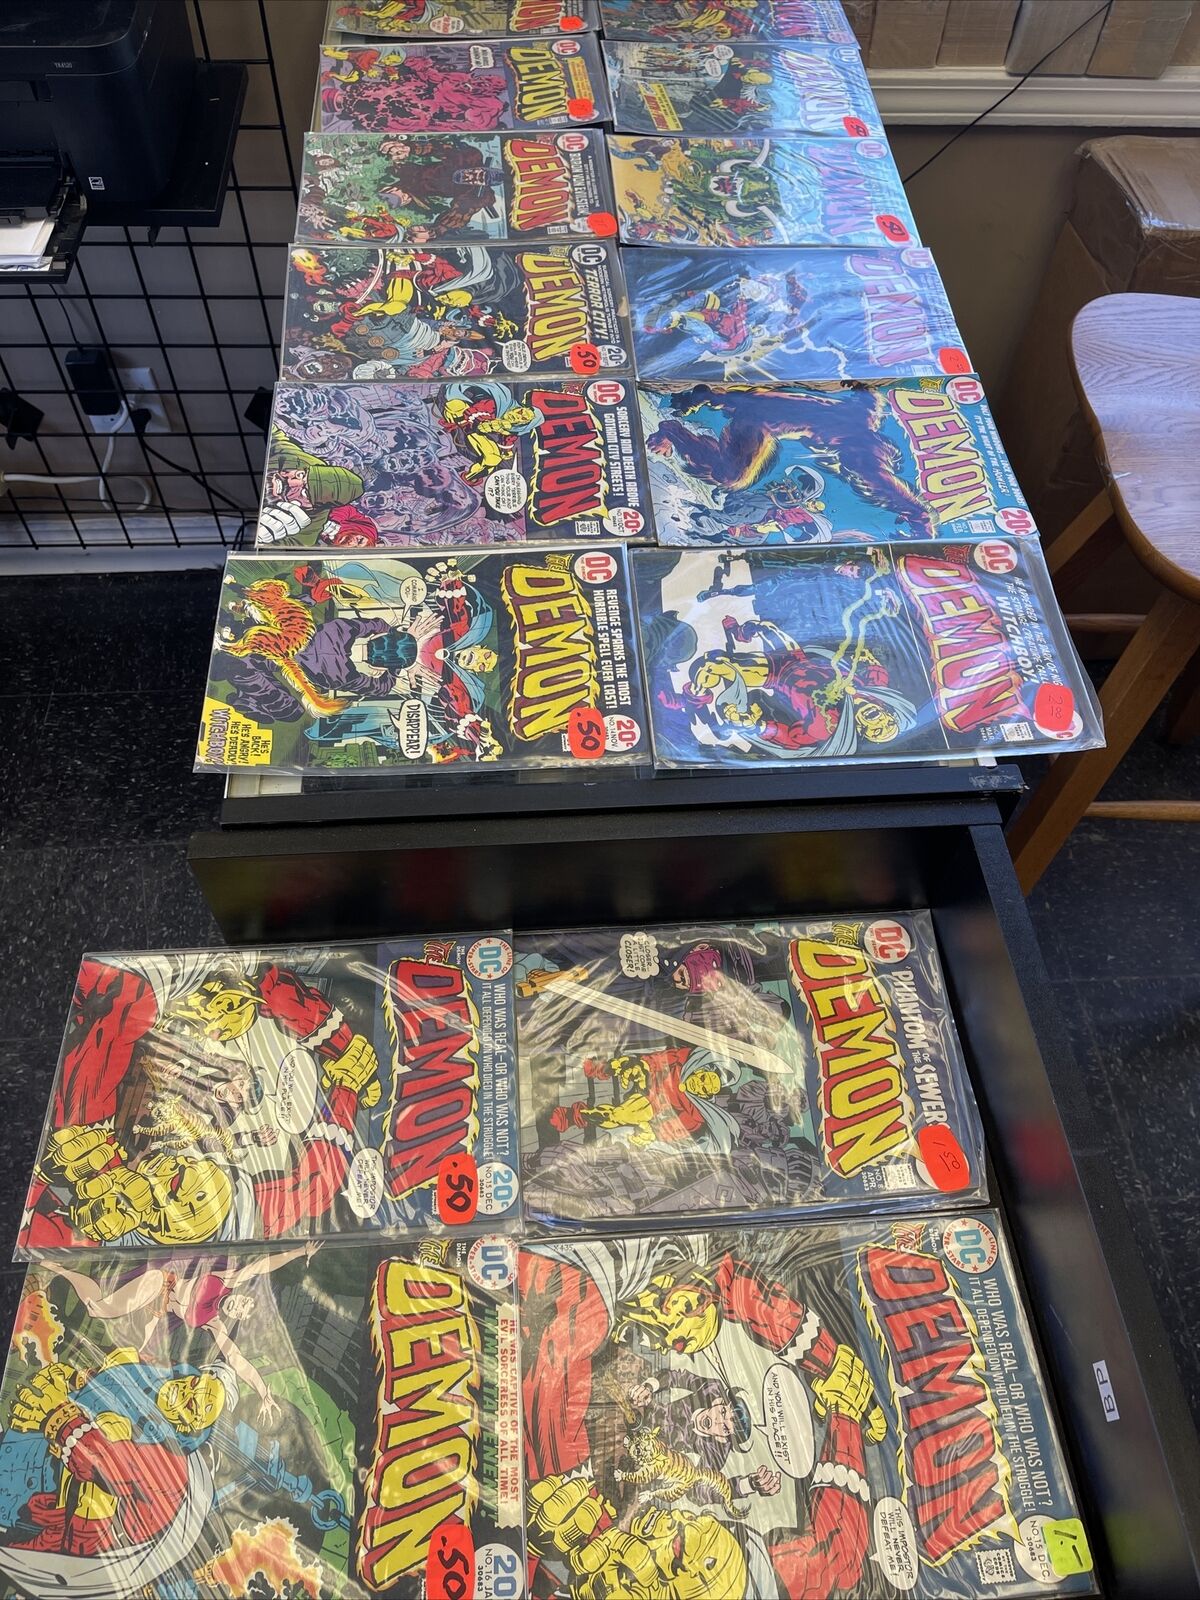 The Demon DC Comics Comic Book Issues 1-3 , 5-14 Very Rare And Hard To Find Wow